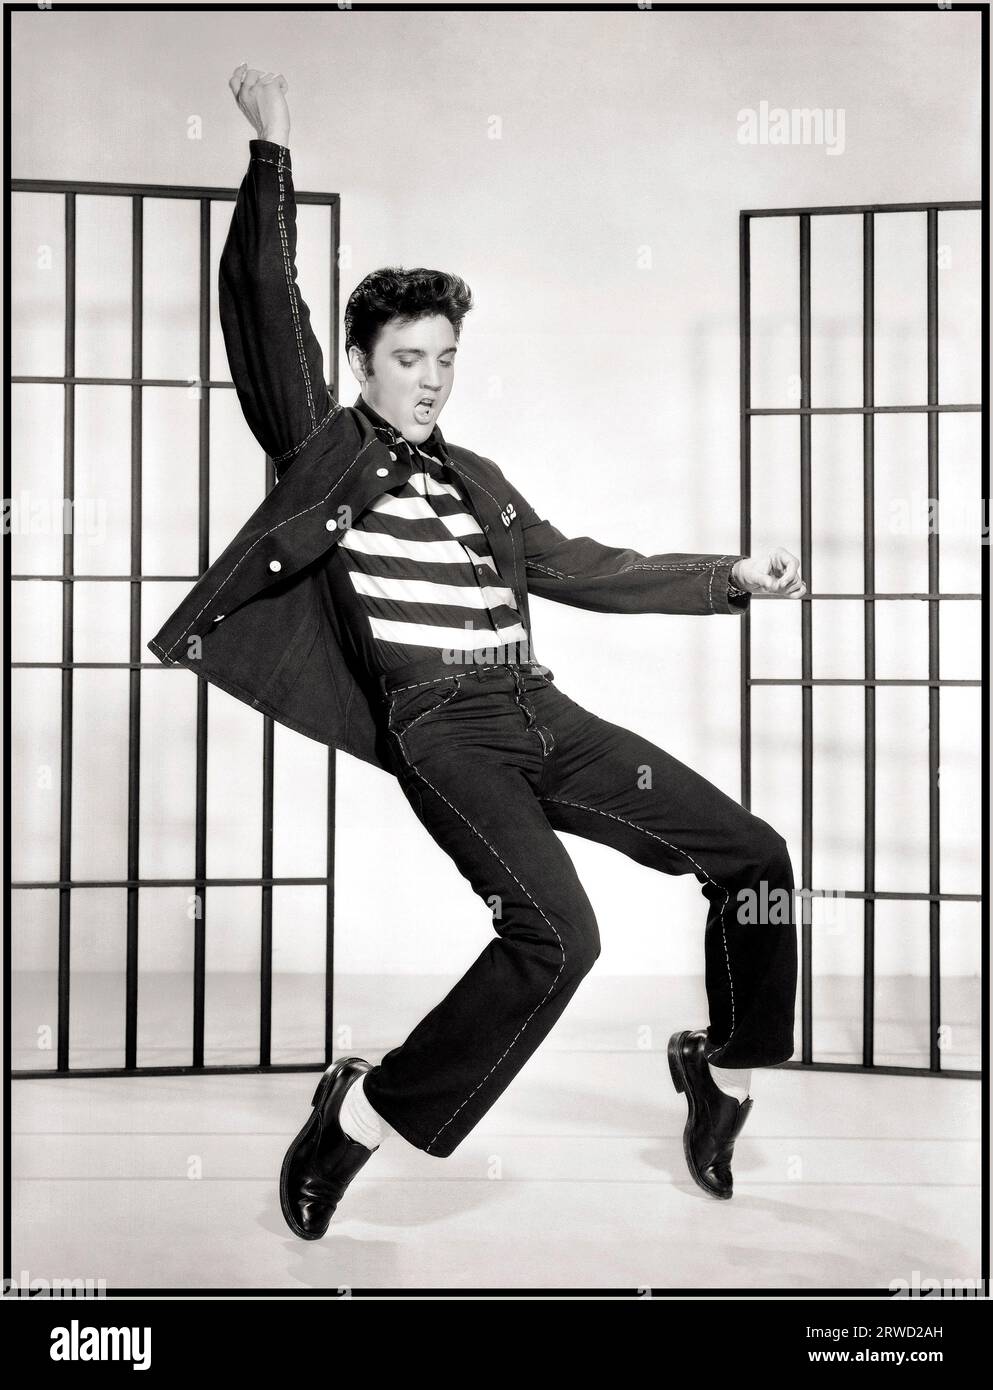 JAILHOUSE ROCK 1950's Elvis Presley film still from the iconic seminal Movie & Song 'Jailhouse Rock' 1957 The song lyrics start... 'Warden threw a party in the county Jail' Hollywood USA Stock Photo